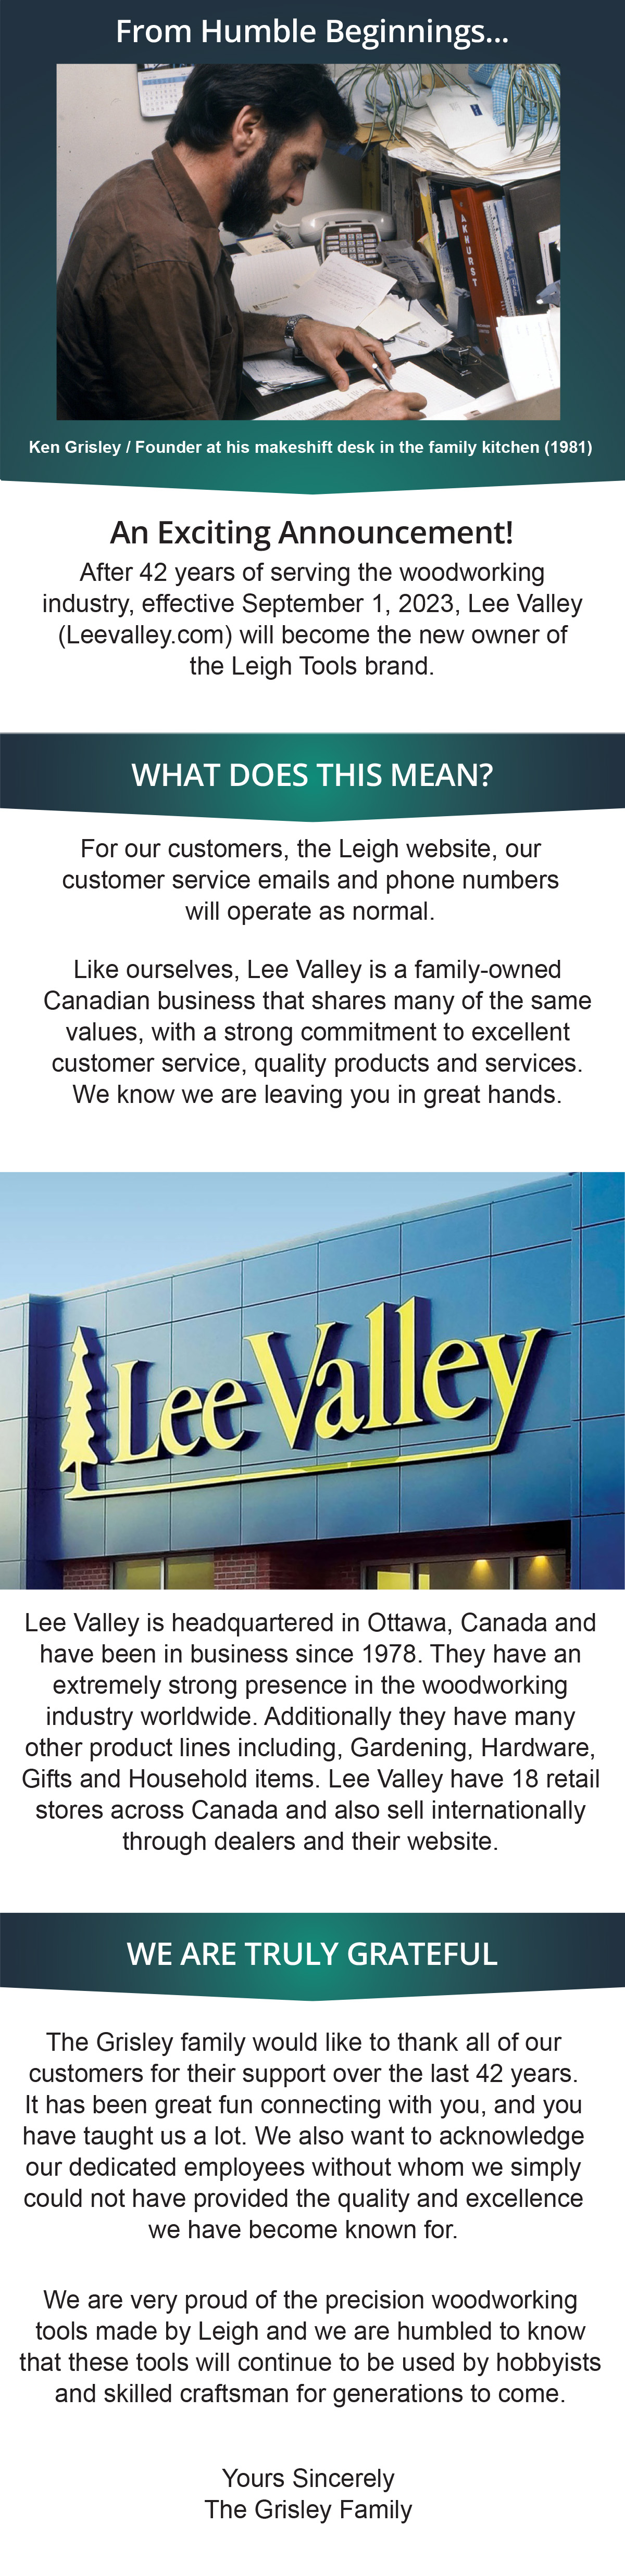 Coquitlam - Lee Valley Tools